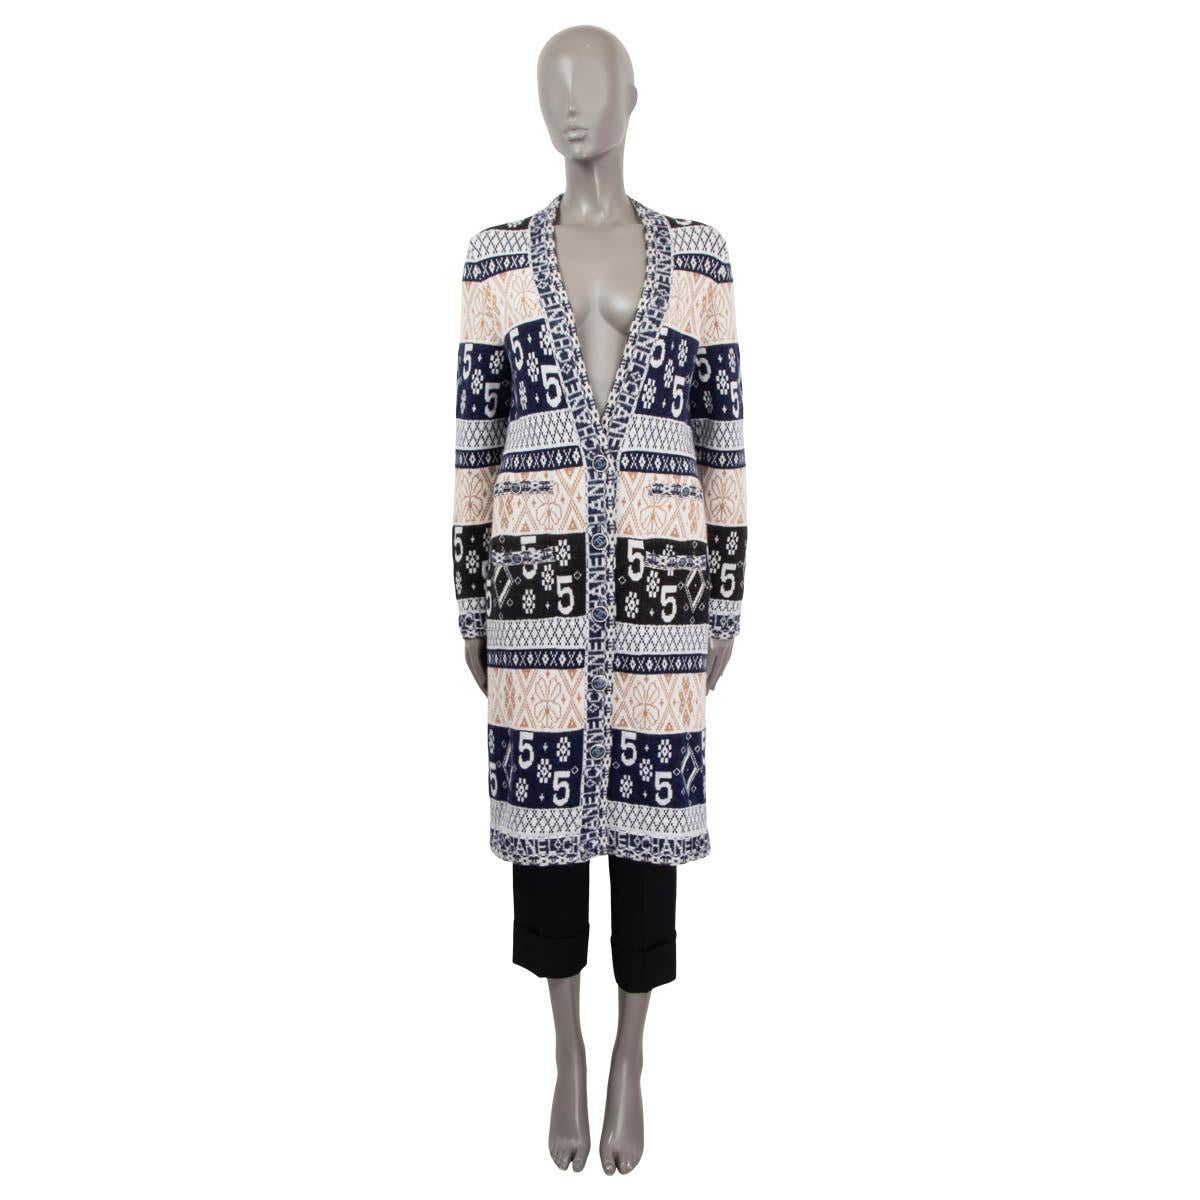 100% authentic Chanel Pre-Fall 2020 deep v-neck long cardigan in navy, brown, black, camel and off-white cashmere (100%). Features long sleeves and four buttoned patch pockets on the front, two of them still sewn shut. Opens with 'CC' buttons on the